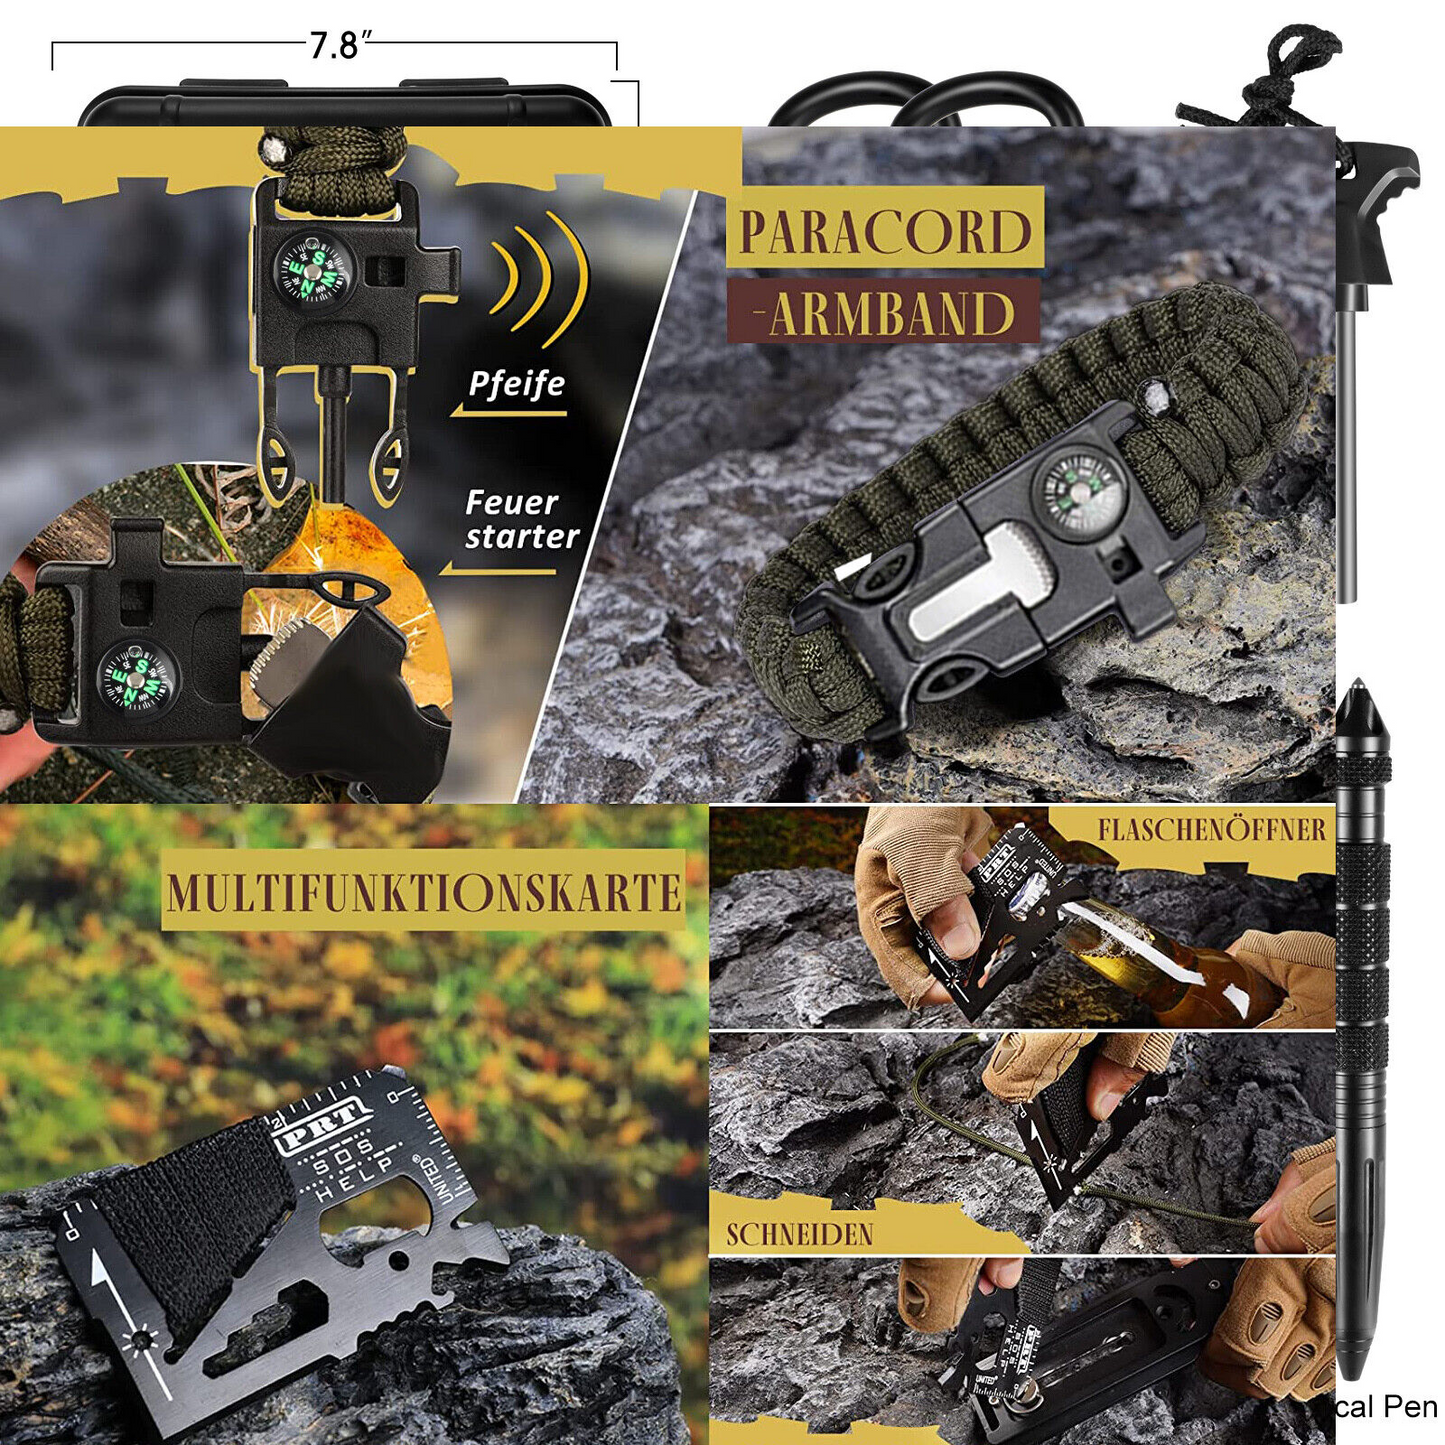 14 in 1 Emergency Survival Equipment Kit Camping